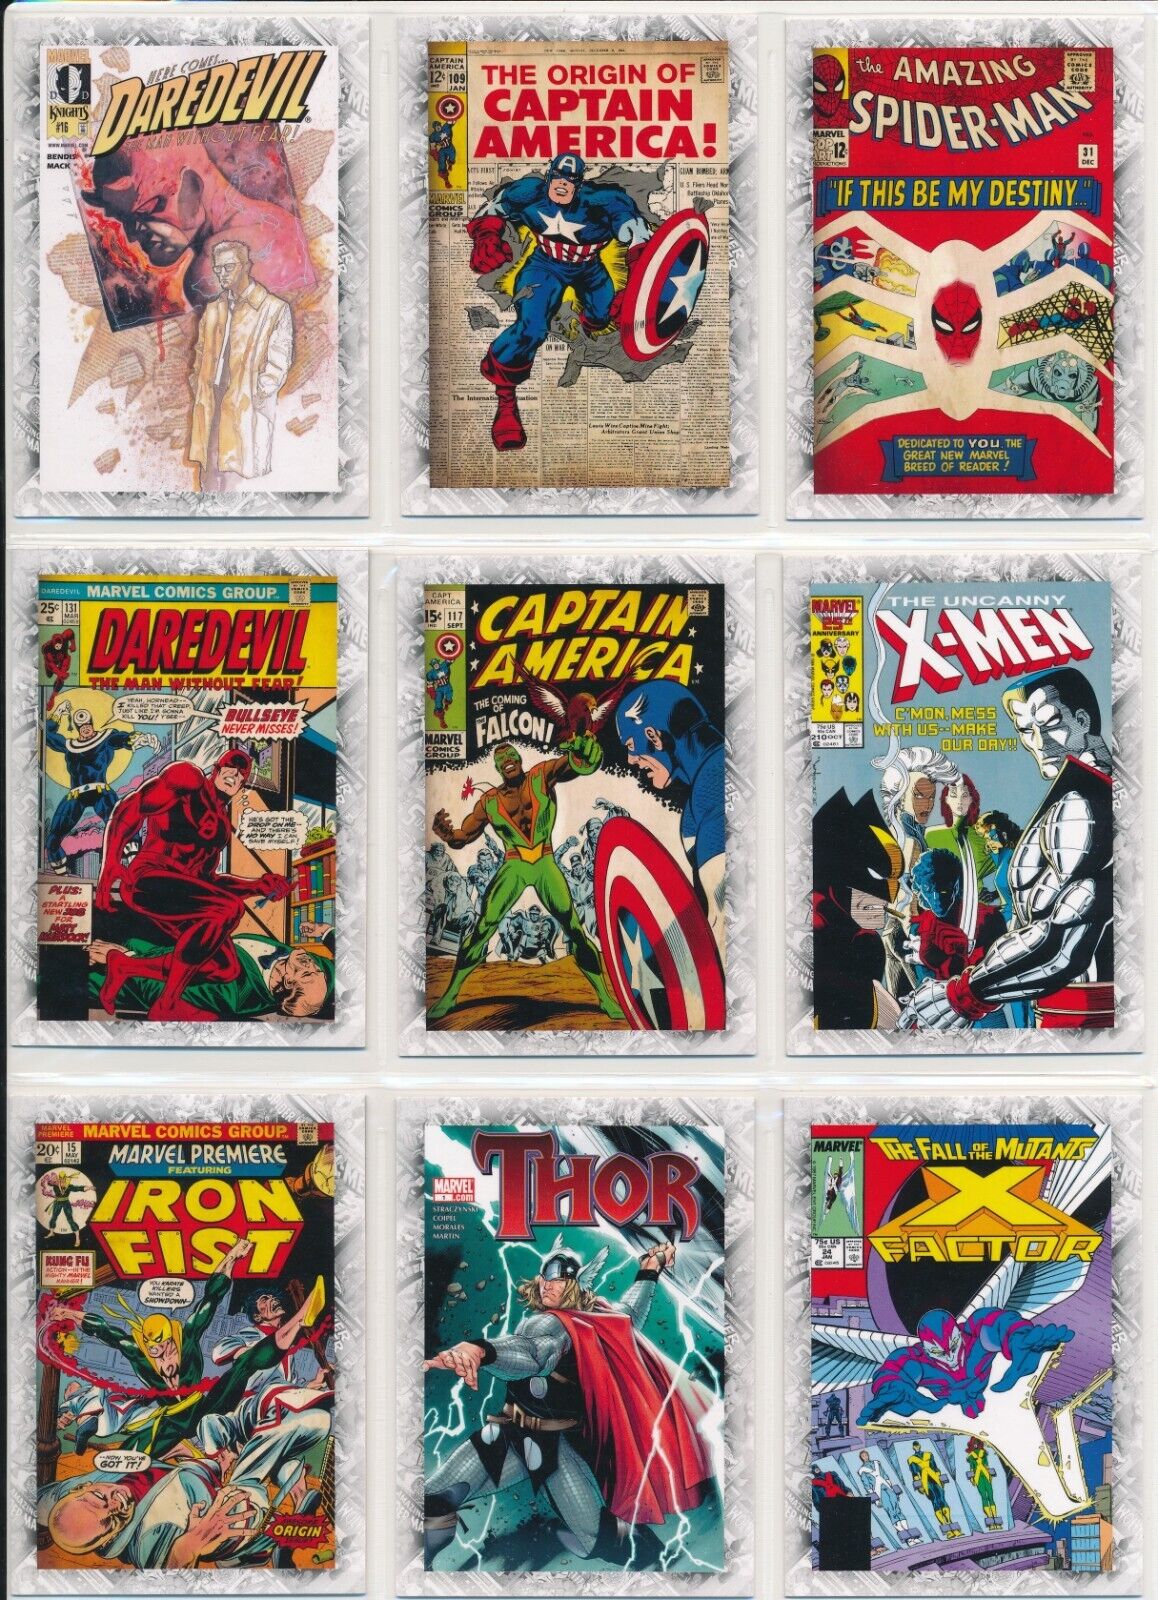 2012 Marvel Beginnings Breakthrough Issues Mixed Chase Card Lot of (9) Cards #2